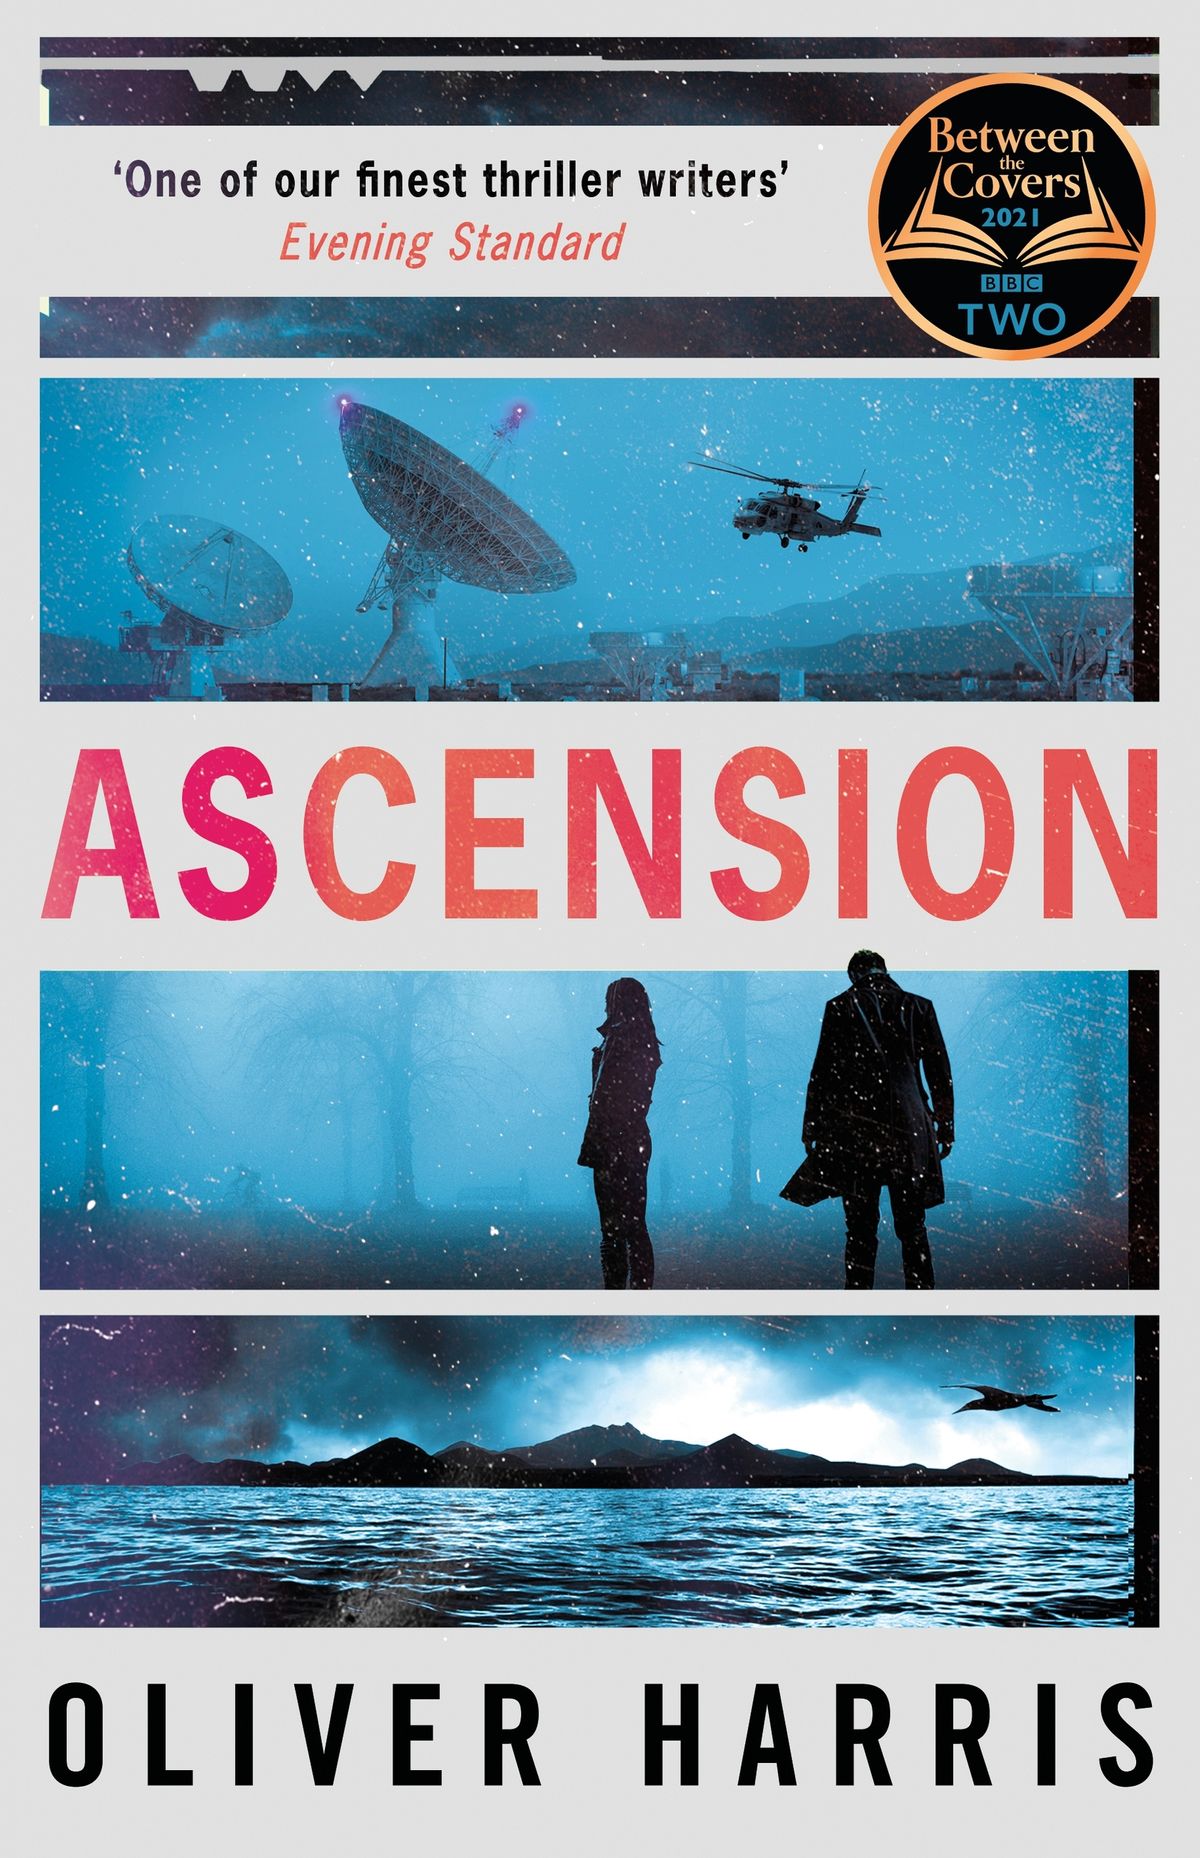 The cover of Ascension by Oliver Harris